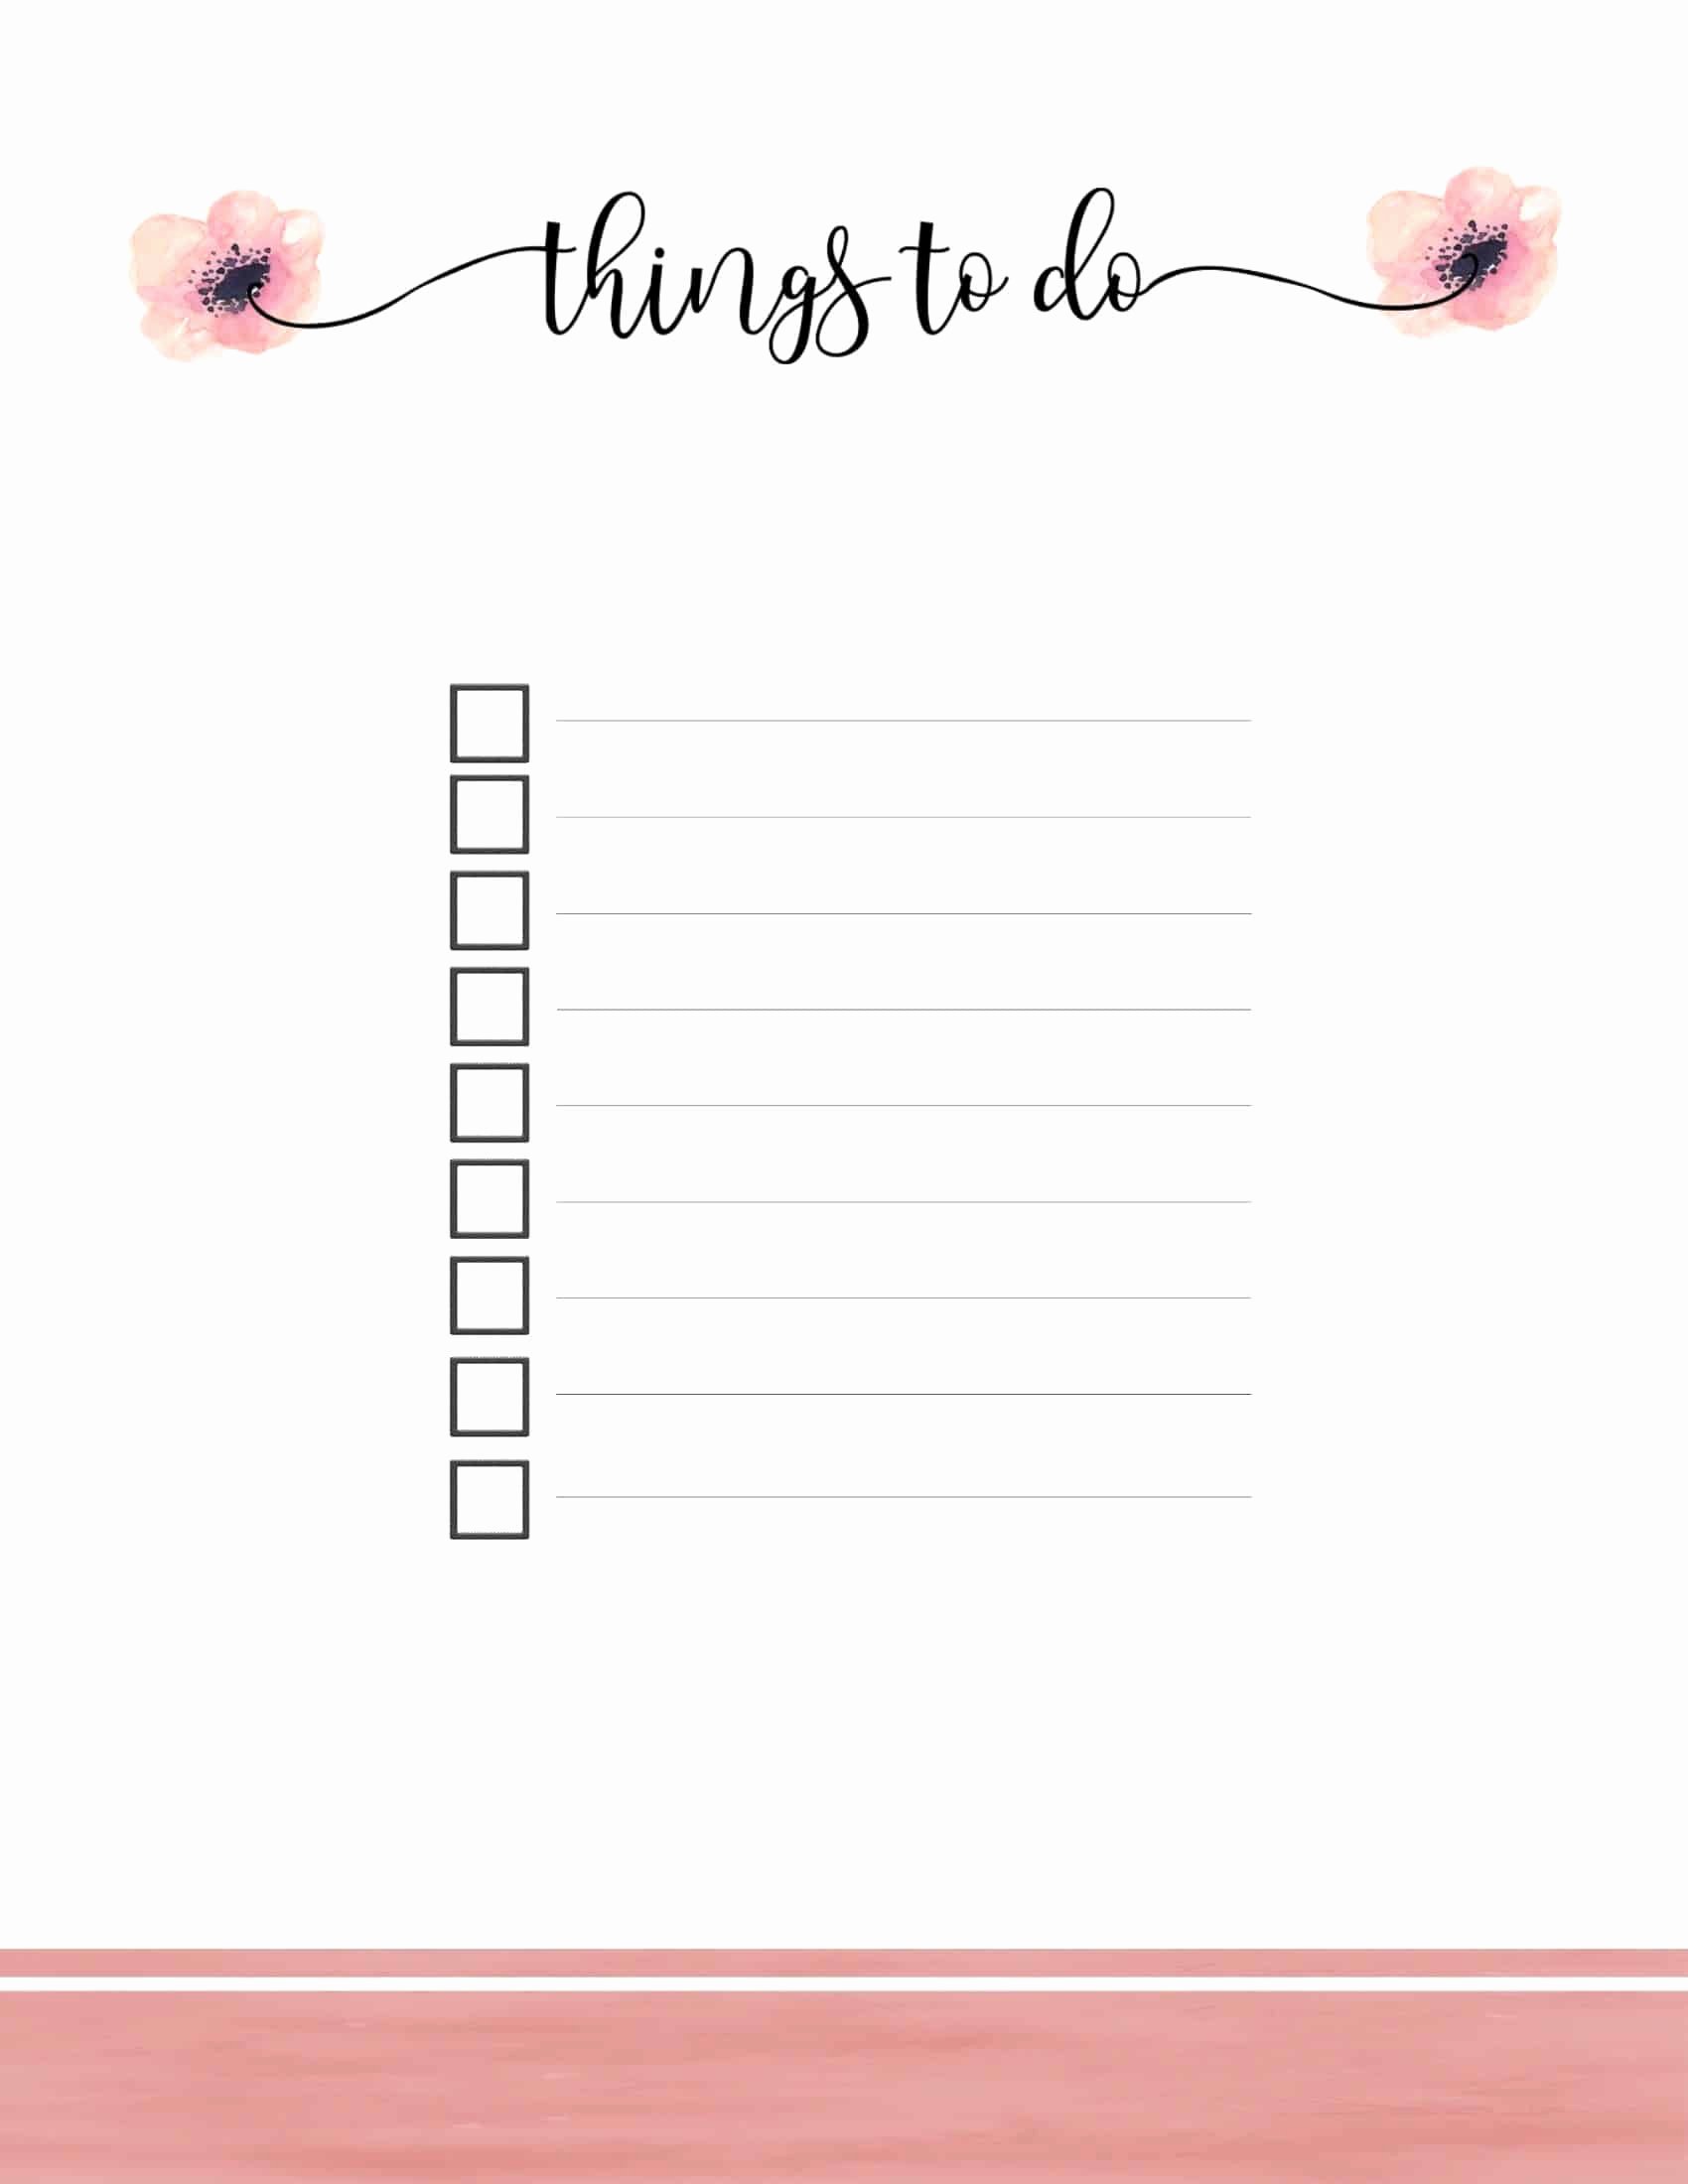 To Do Checklist Template Awesome Printable to Do List